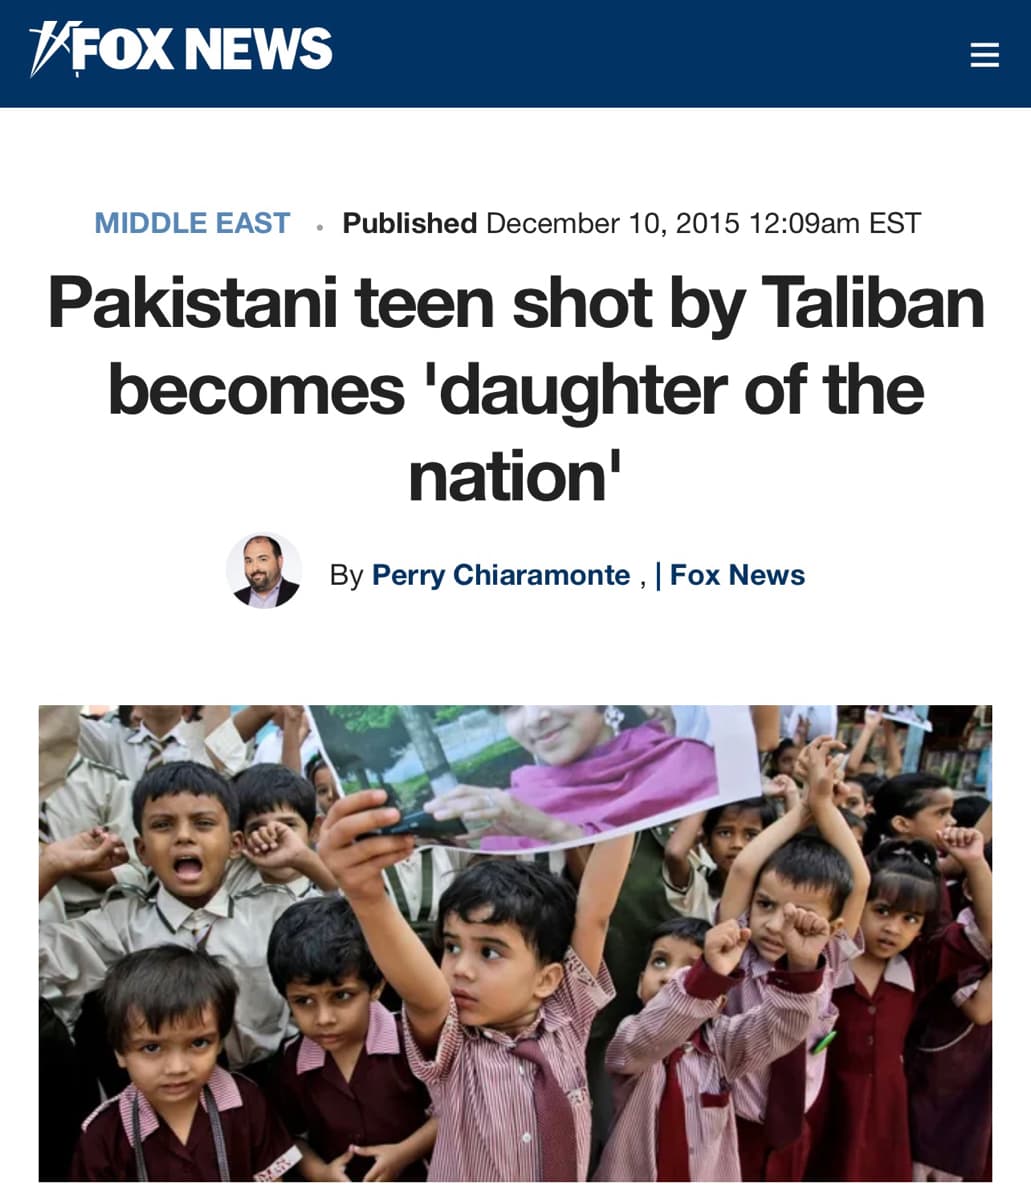 *FOX NEWS
MIDDLE EAST Published December 10, 2015 12:09am EST
Pakistani teen shot by Taliban
becomes 'daughter of the
nation'
By Perry Chiaramonte, | Fox News
Bo
www.